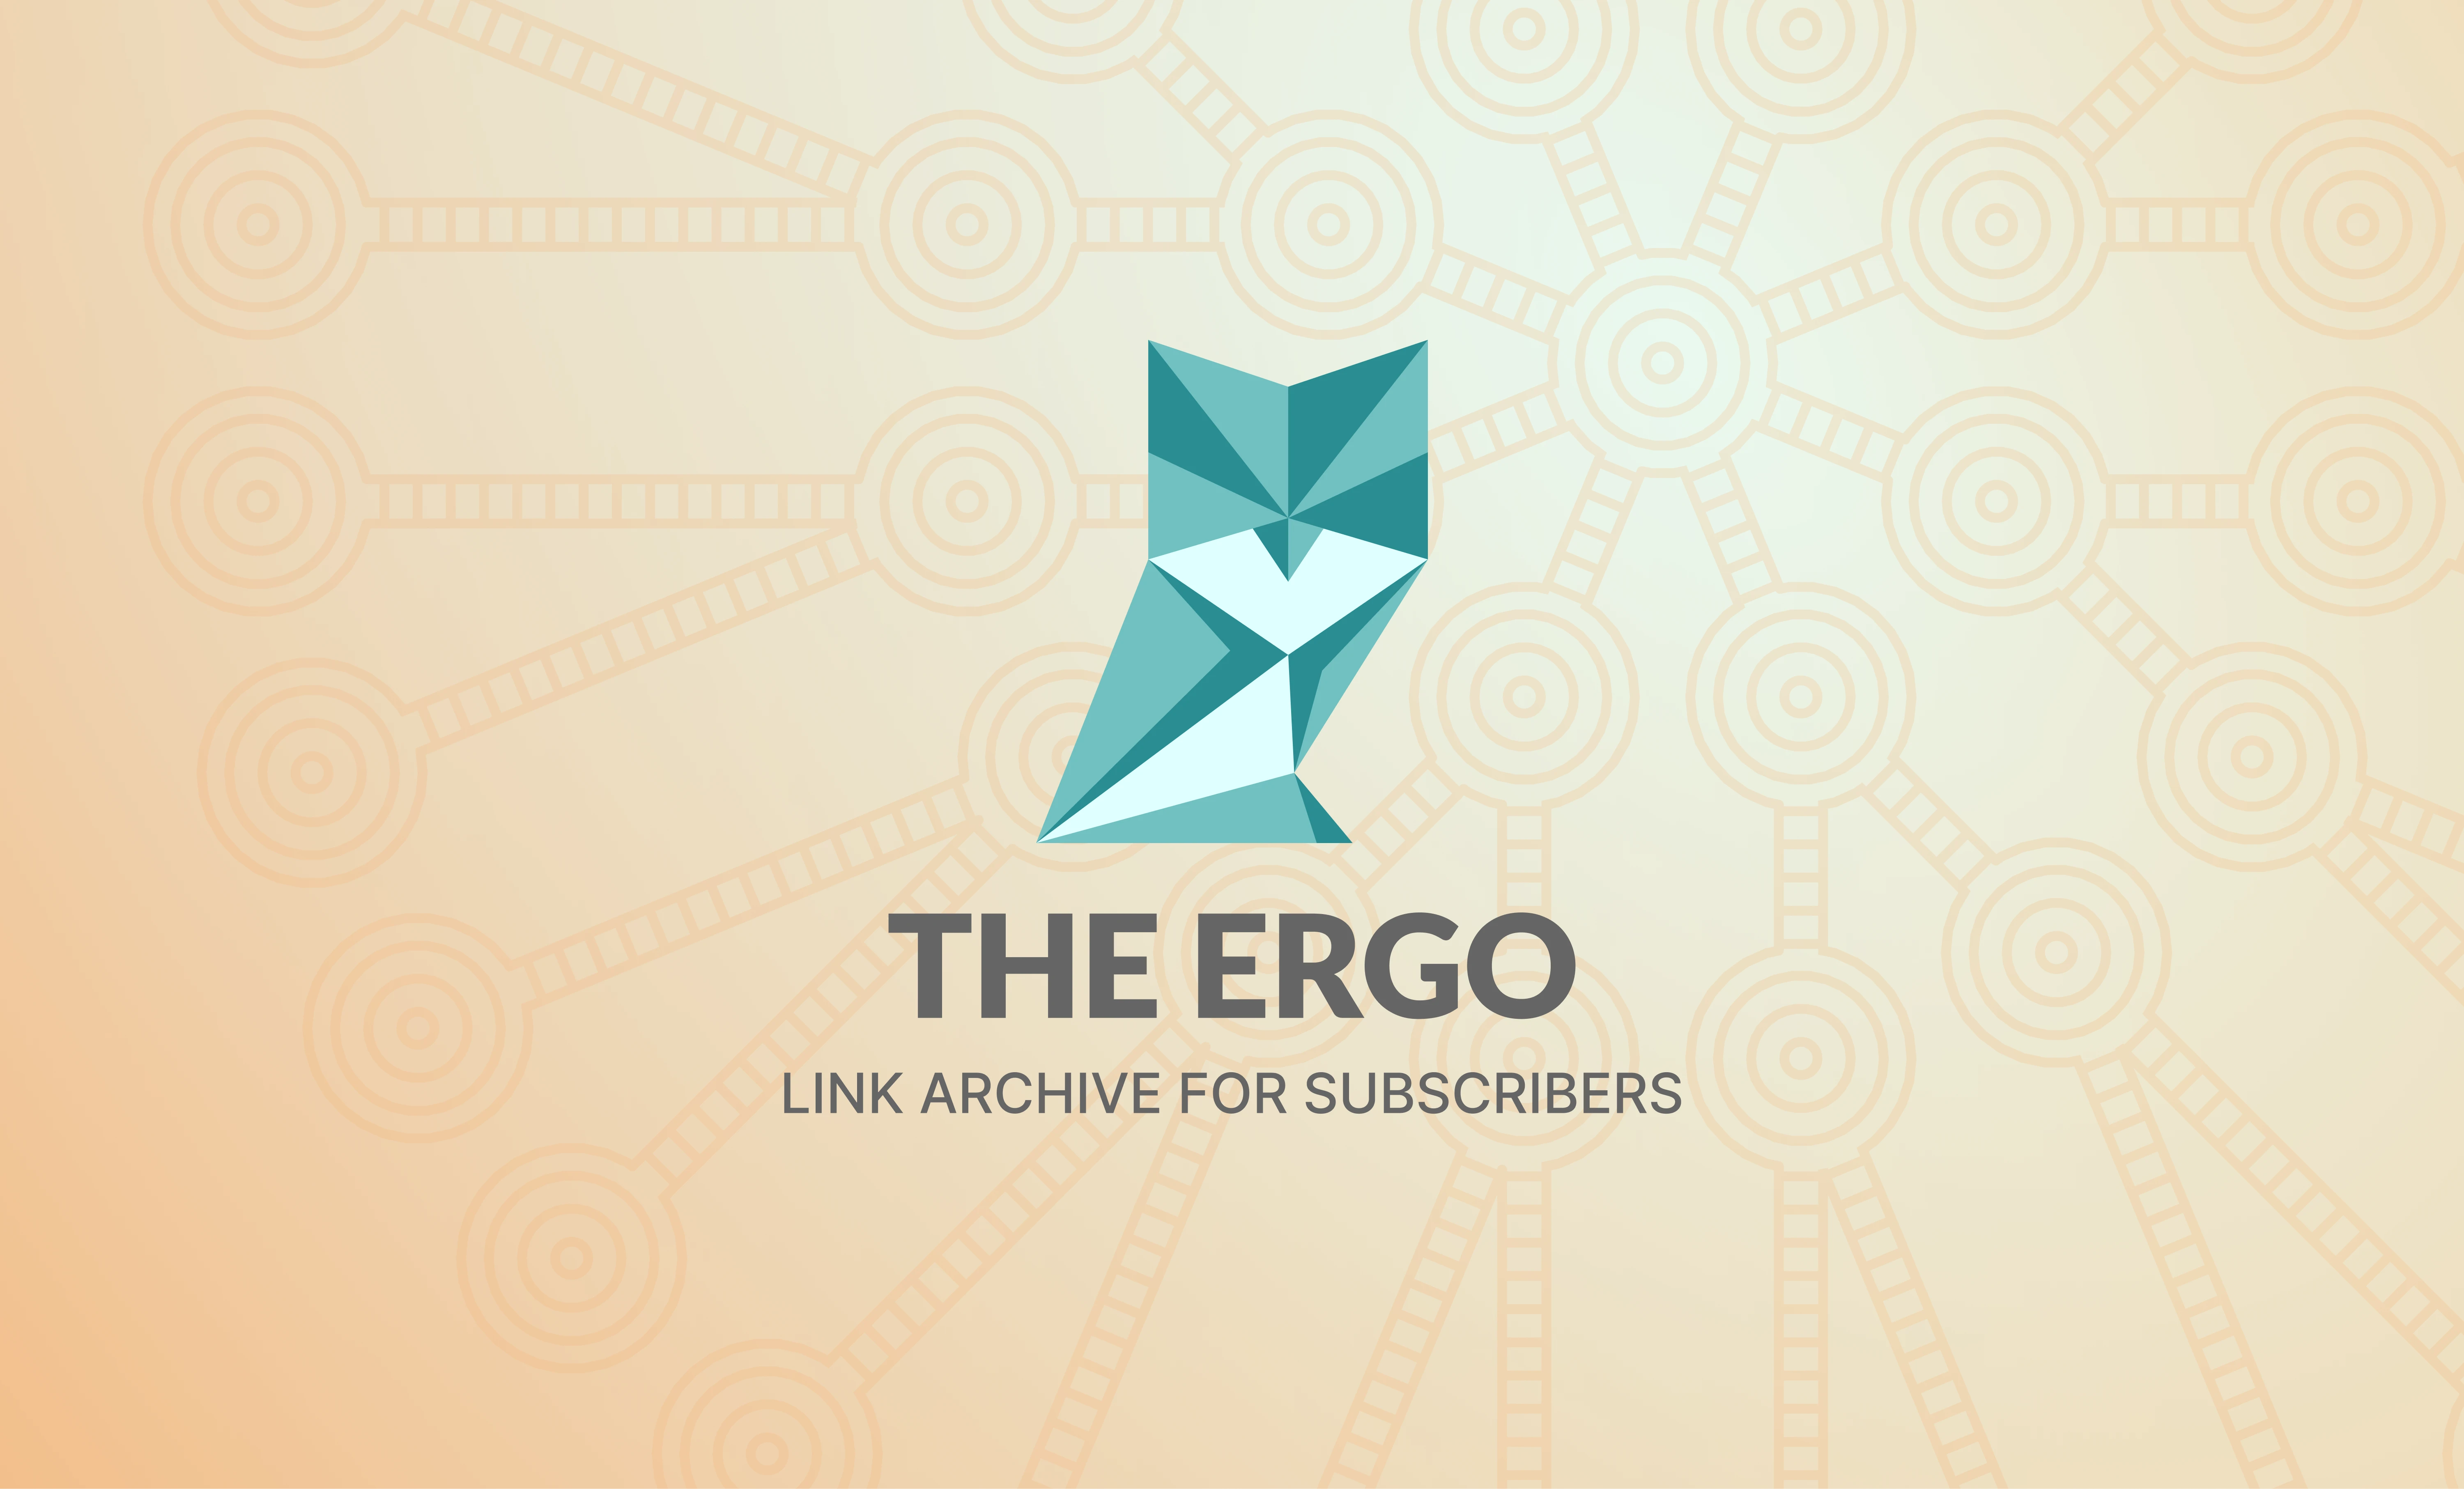 Introducing The Ergo Link Archive